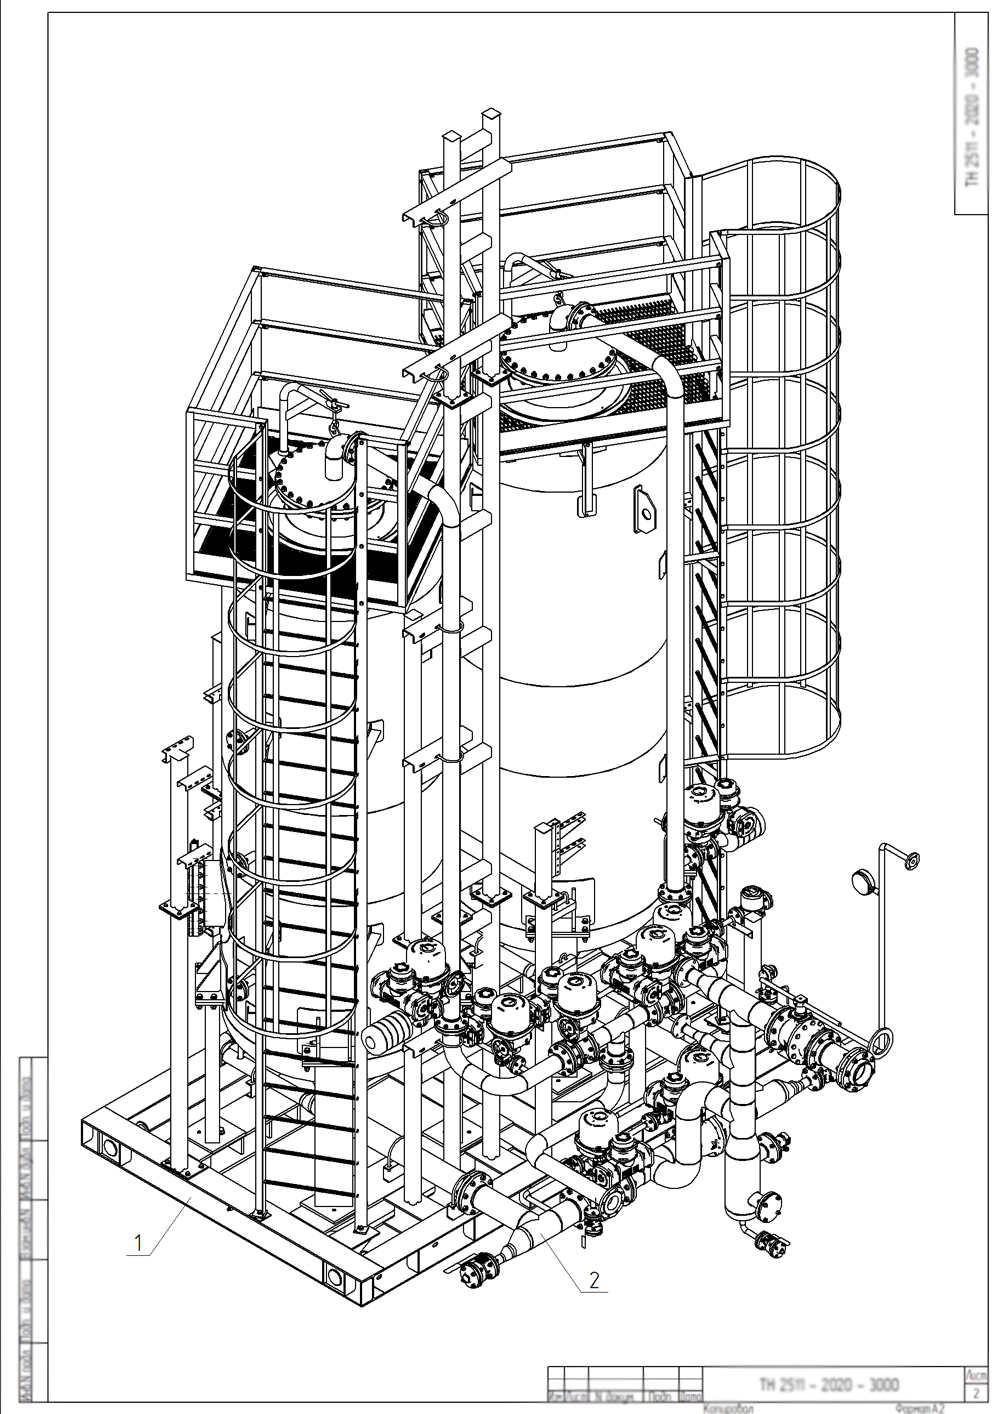 Fig. 4 - Piping arrangement of columns with stairs and service platforms. An isometric projection is shown for the sake of clarity and for better understanding of the design of the device. 